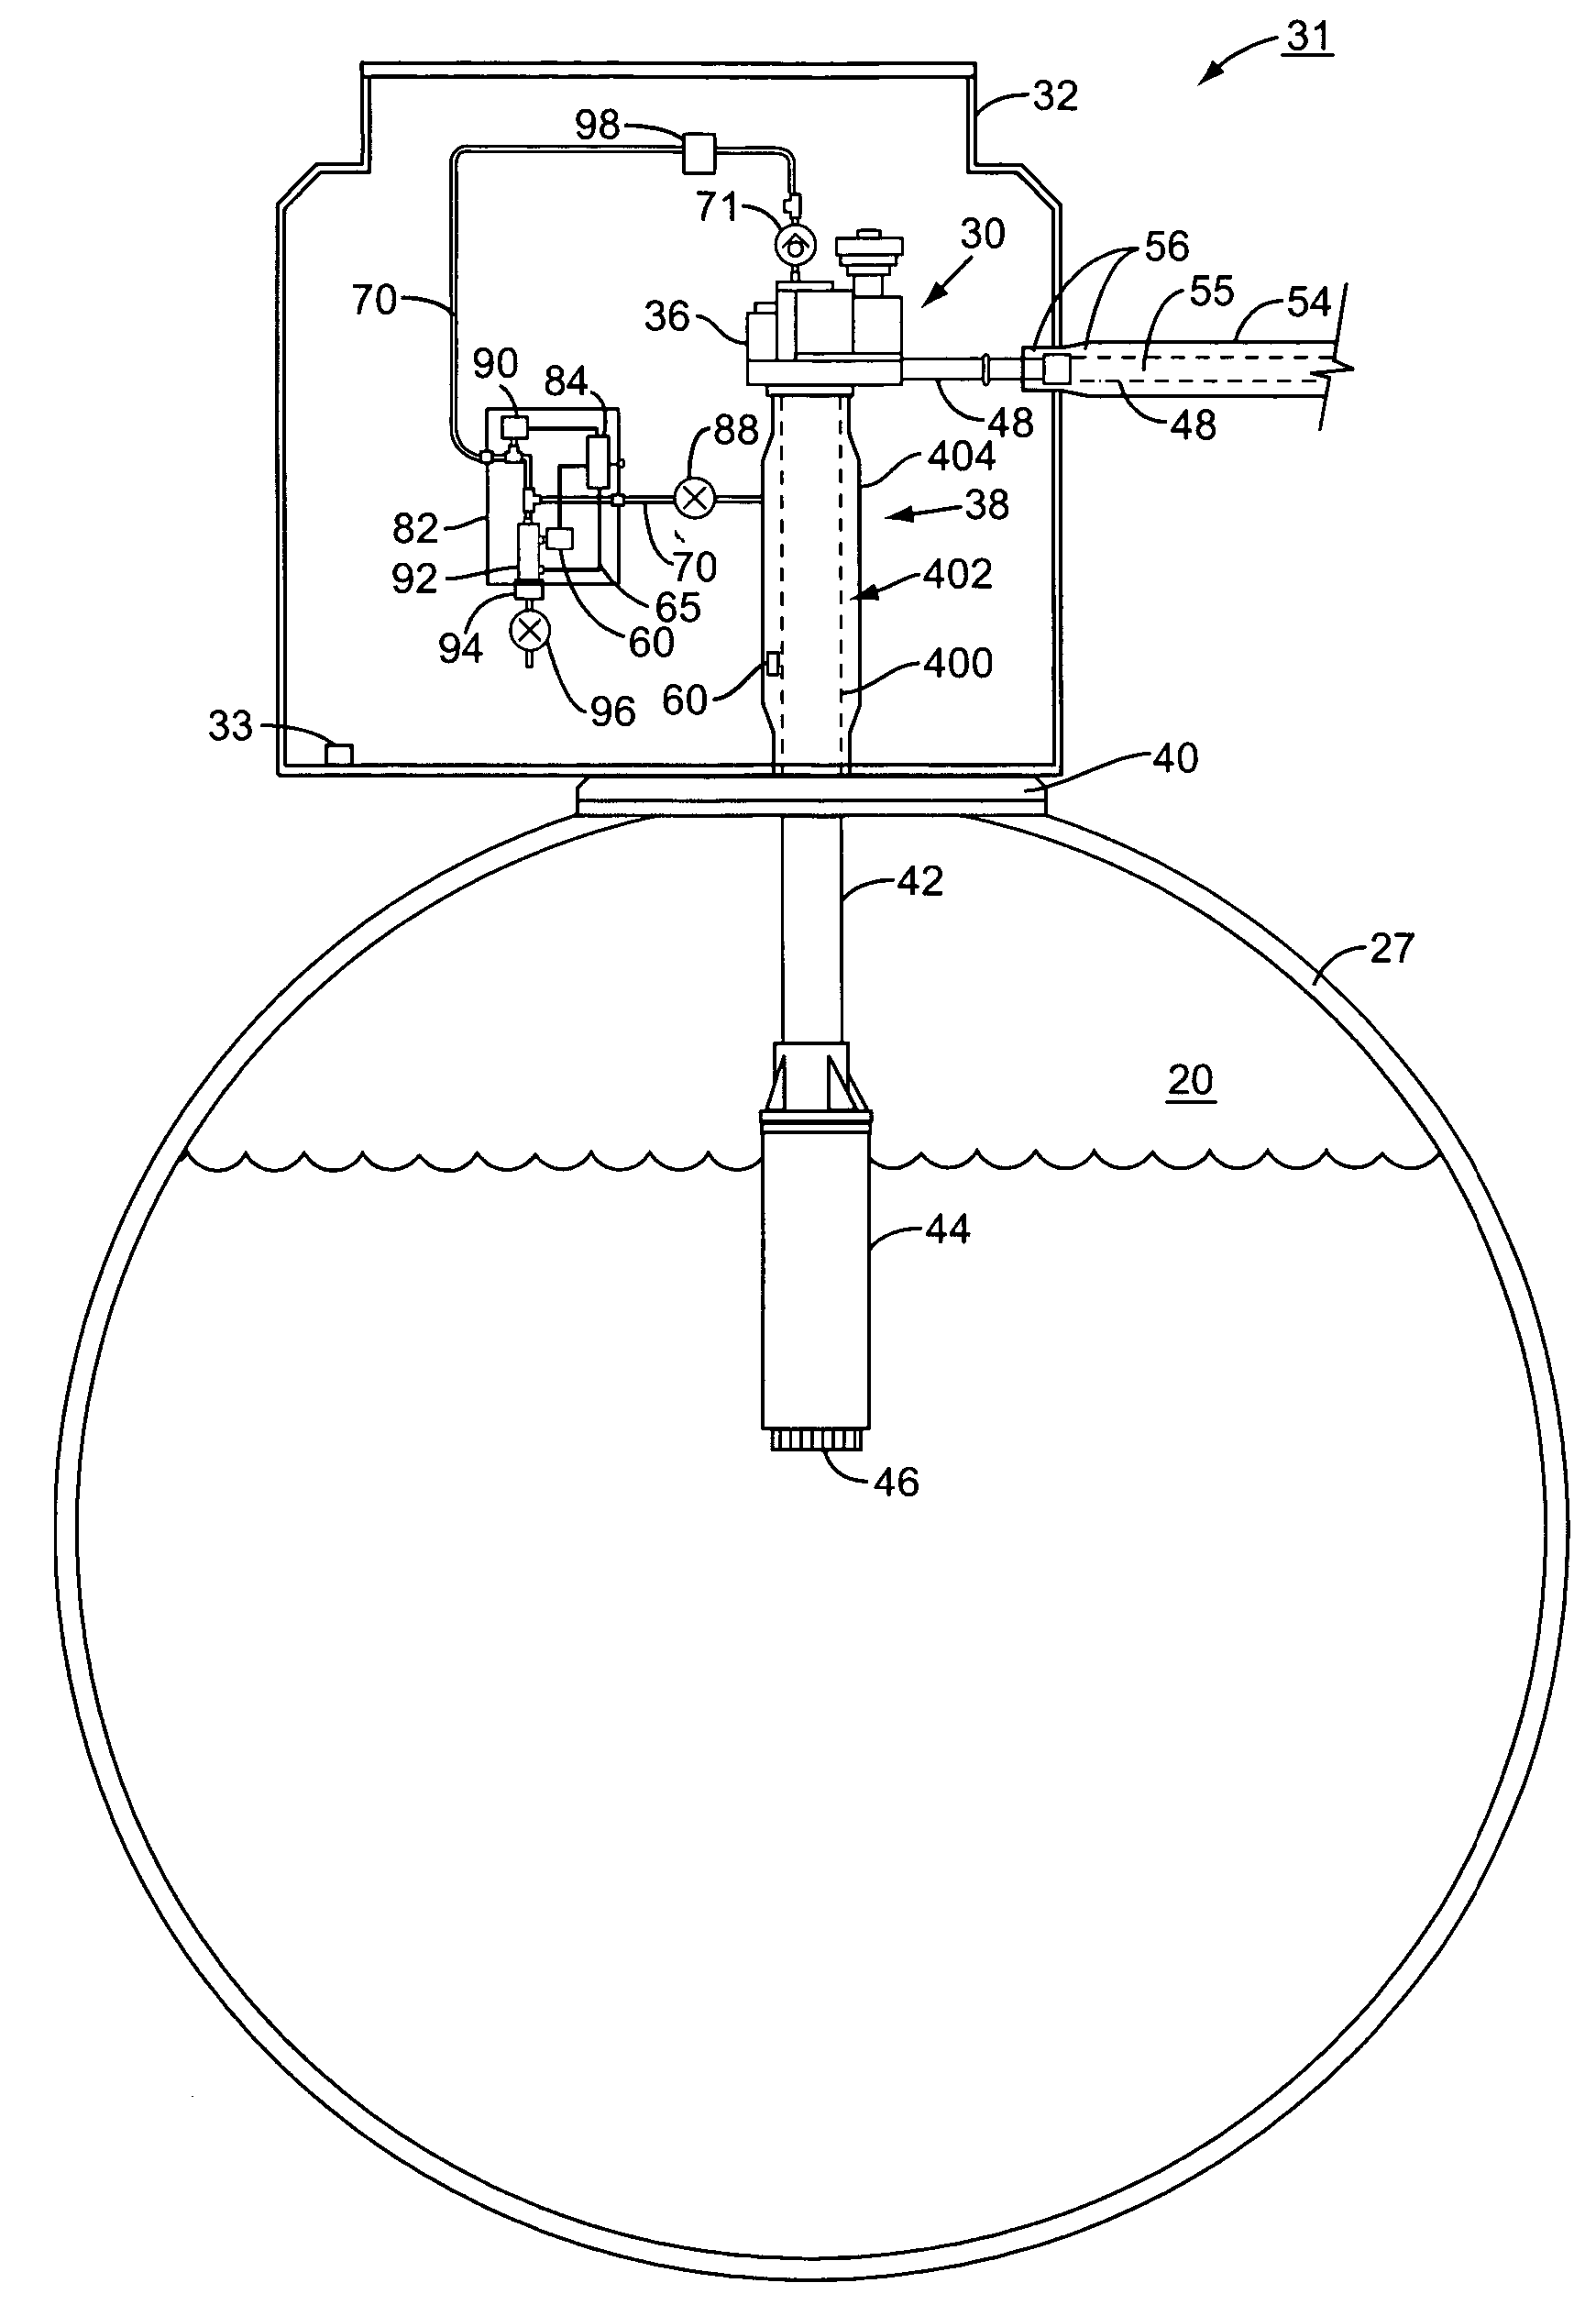 Secondary containment leak prevention and detection system and method